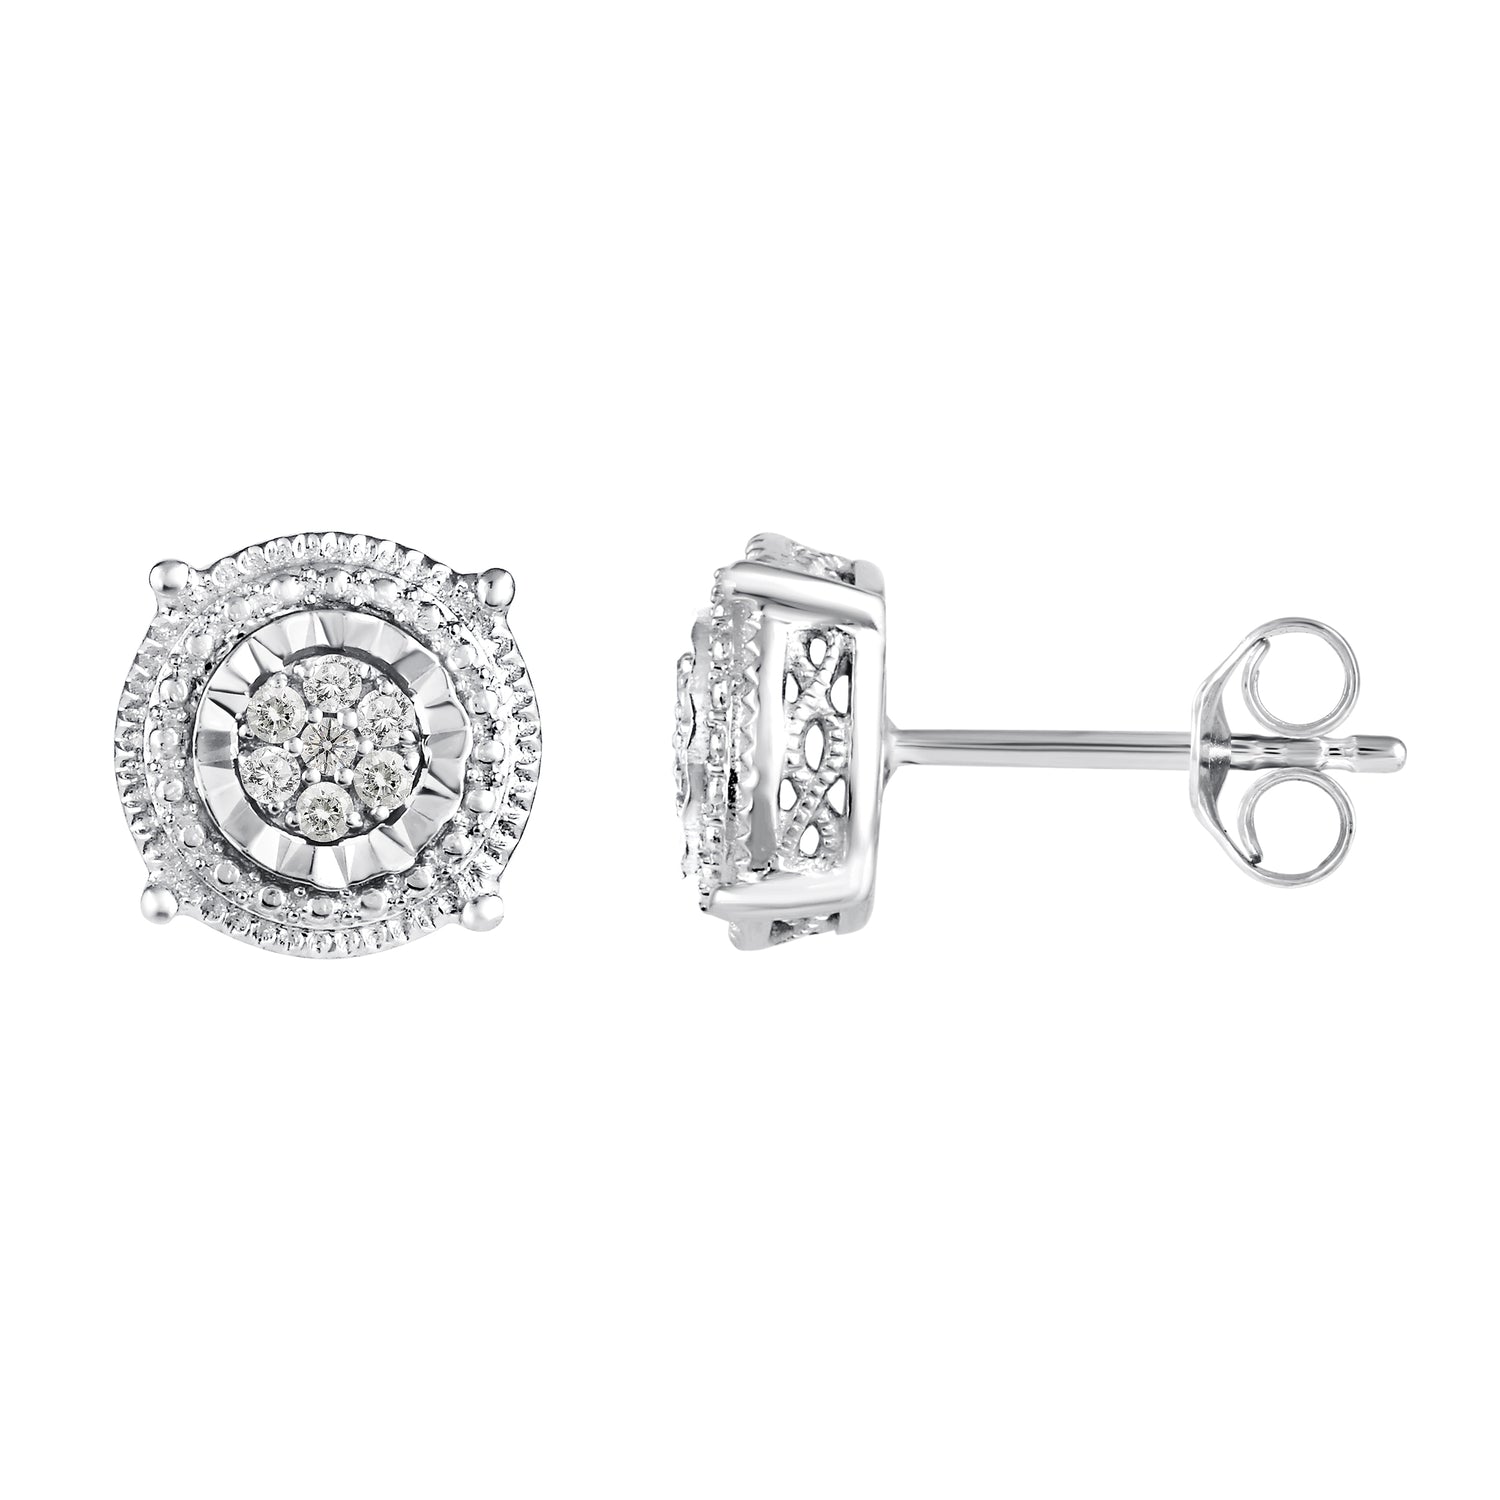 Round/Square Miracle Setting 1/10 Ctw Natural Diamond Stud Earrings set in 925 Sterling Silver